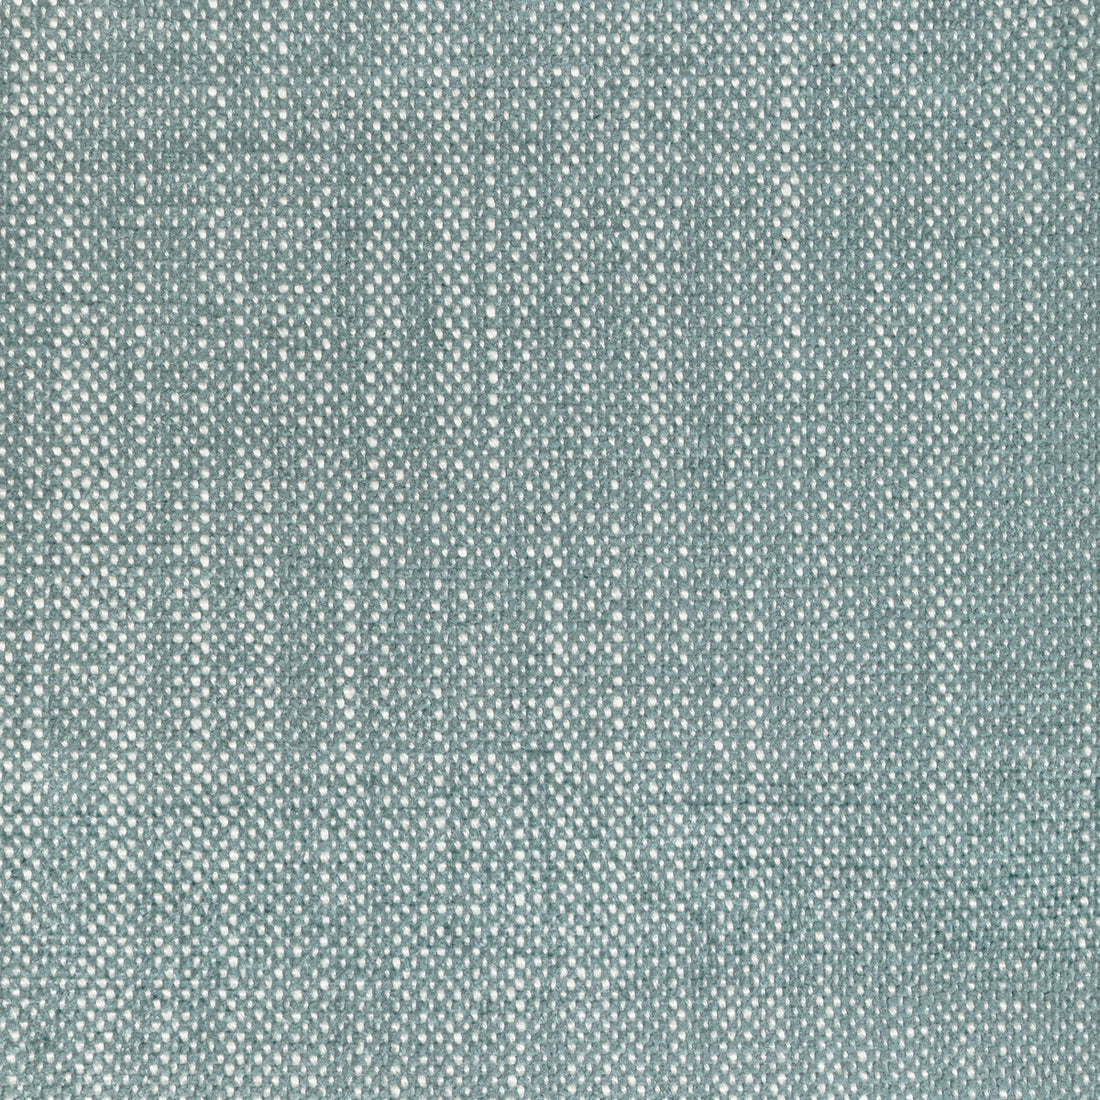 Kravet Design fabric in 36408-115 color - pattern 36408.115.0 - by Kravet Design in the Performance Crypton Home collection